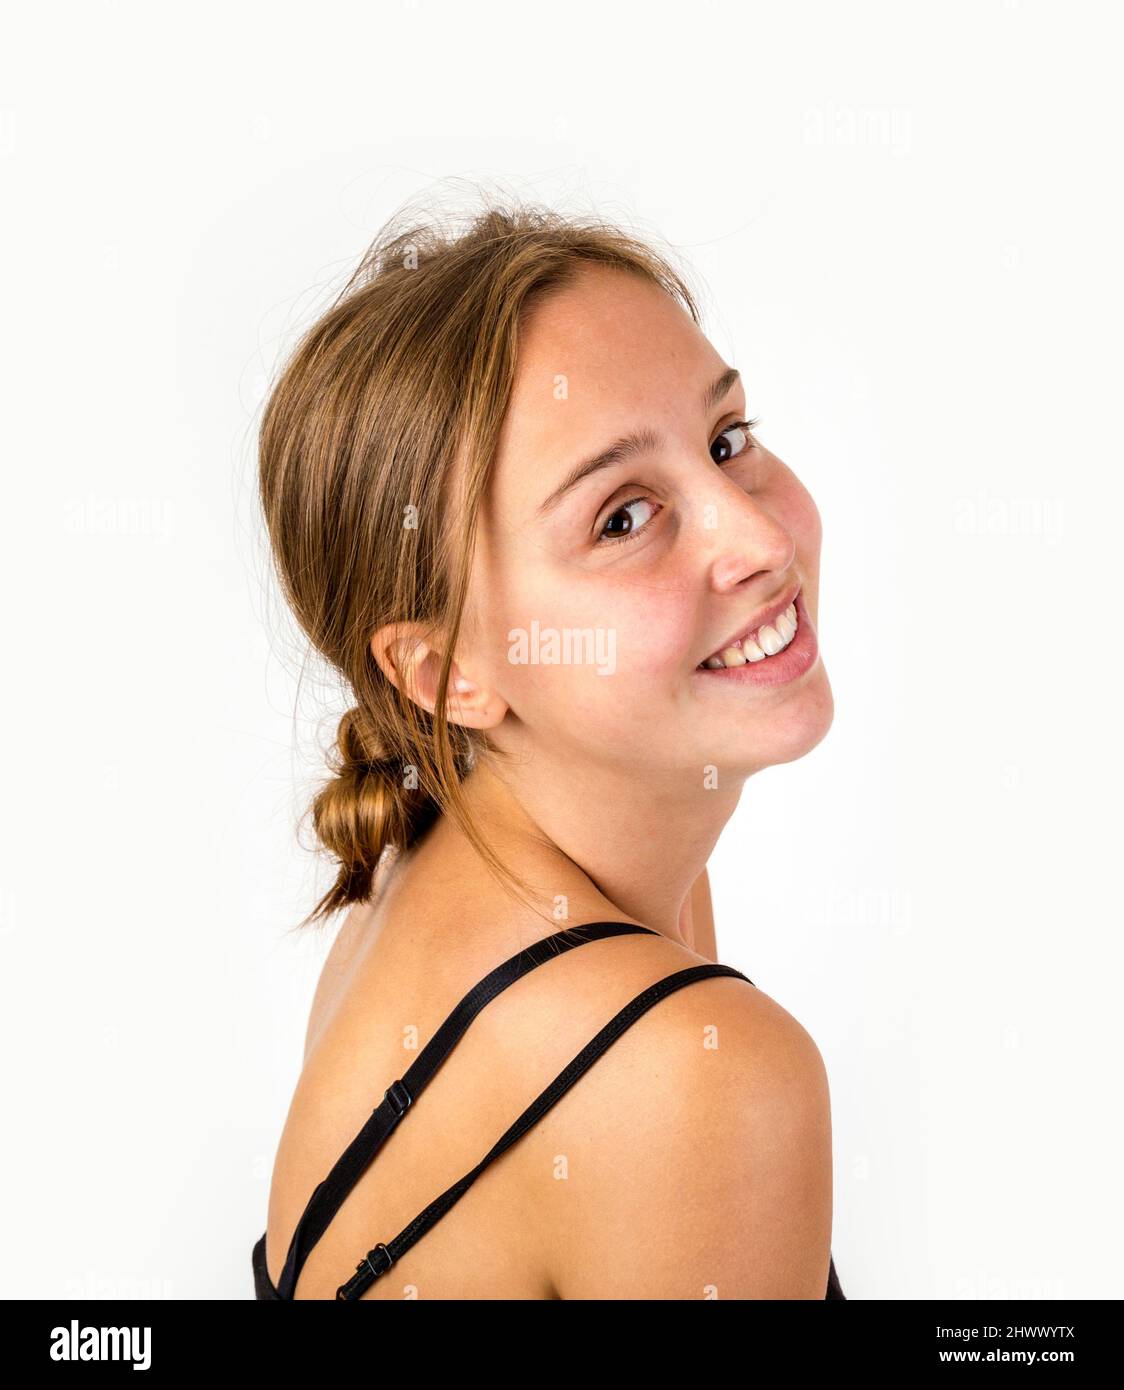 portrait of smiling young beautiful girl with brown hair Stock Photo